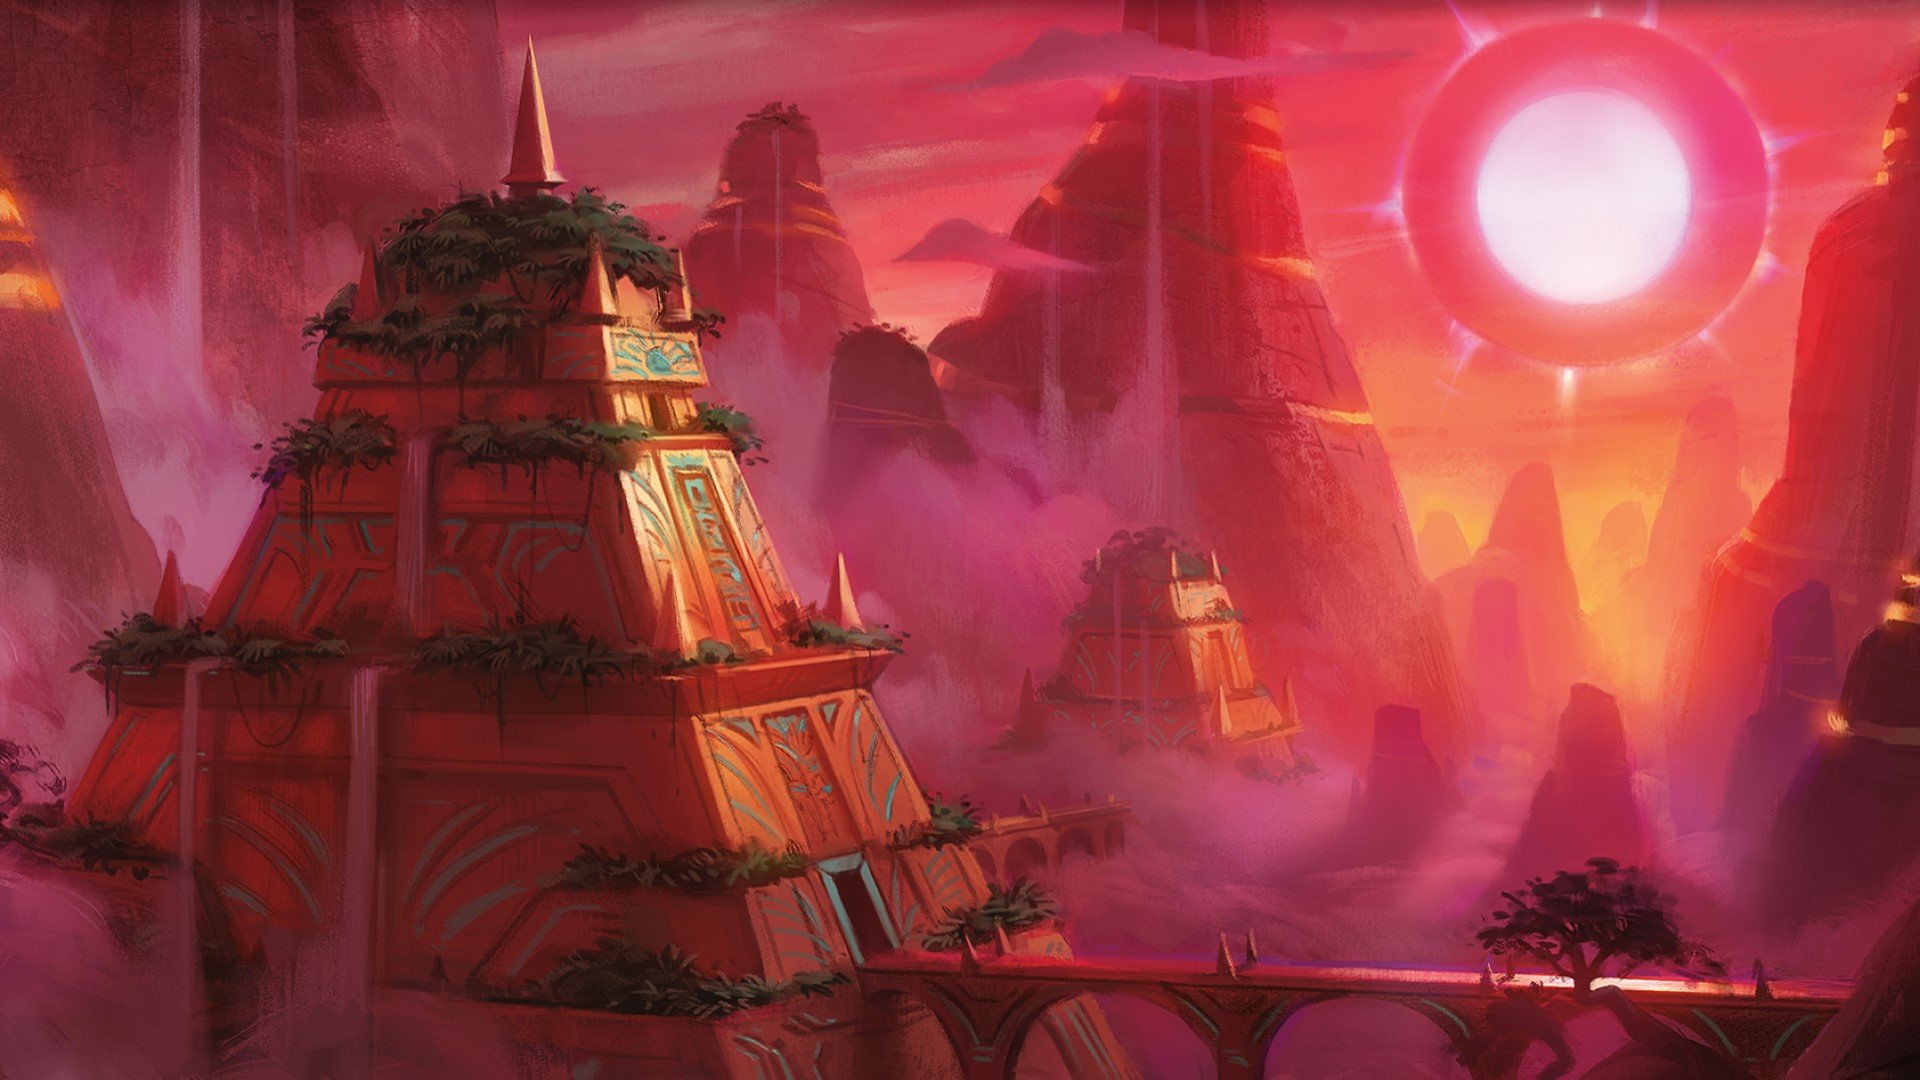 MTG LGS - A red sky over aztec-style paragraphs